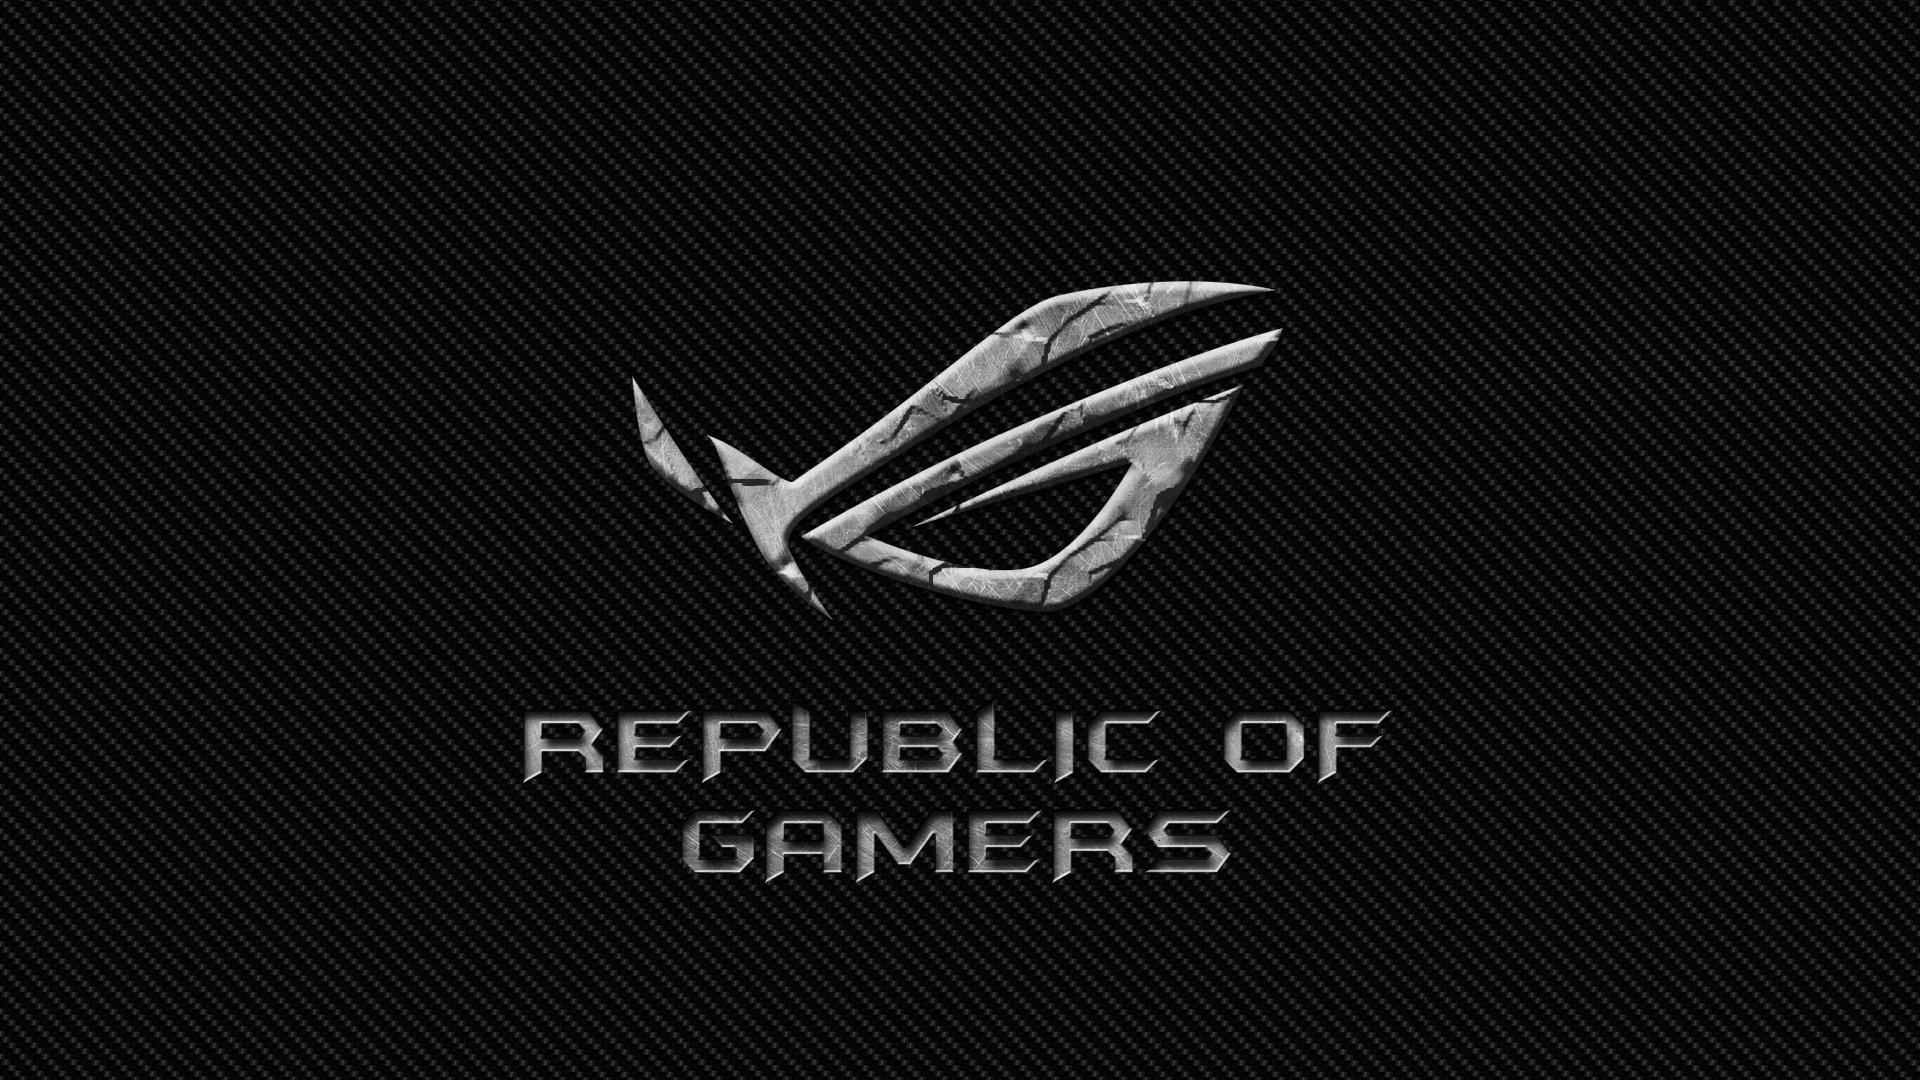 Asus Republic Of Gamers Carbon By Fishbone Art